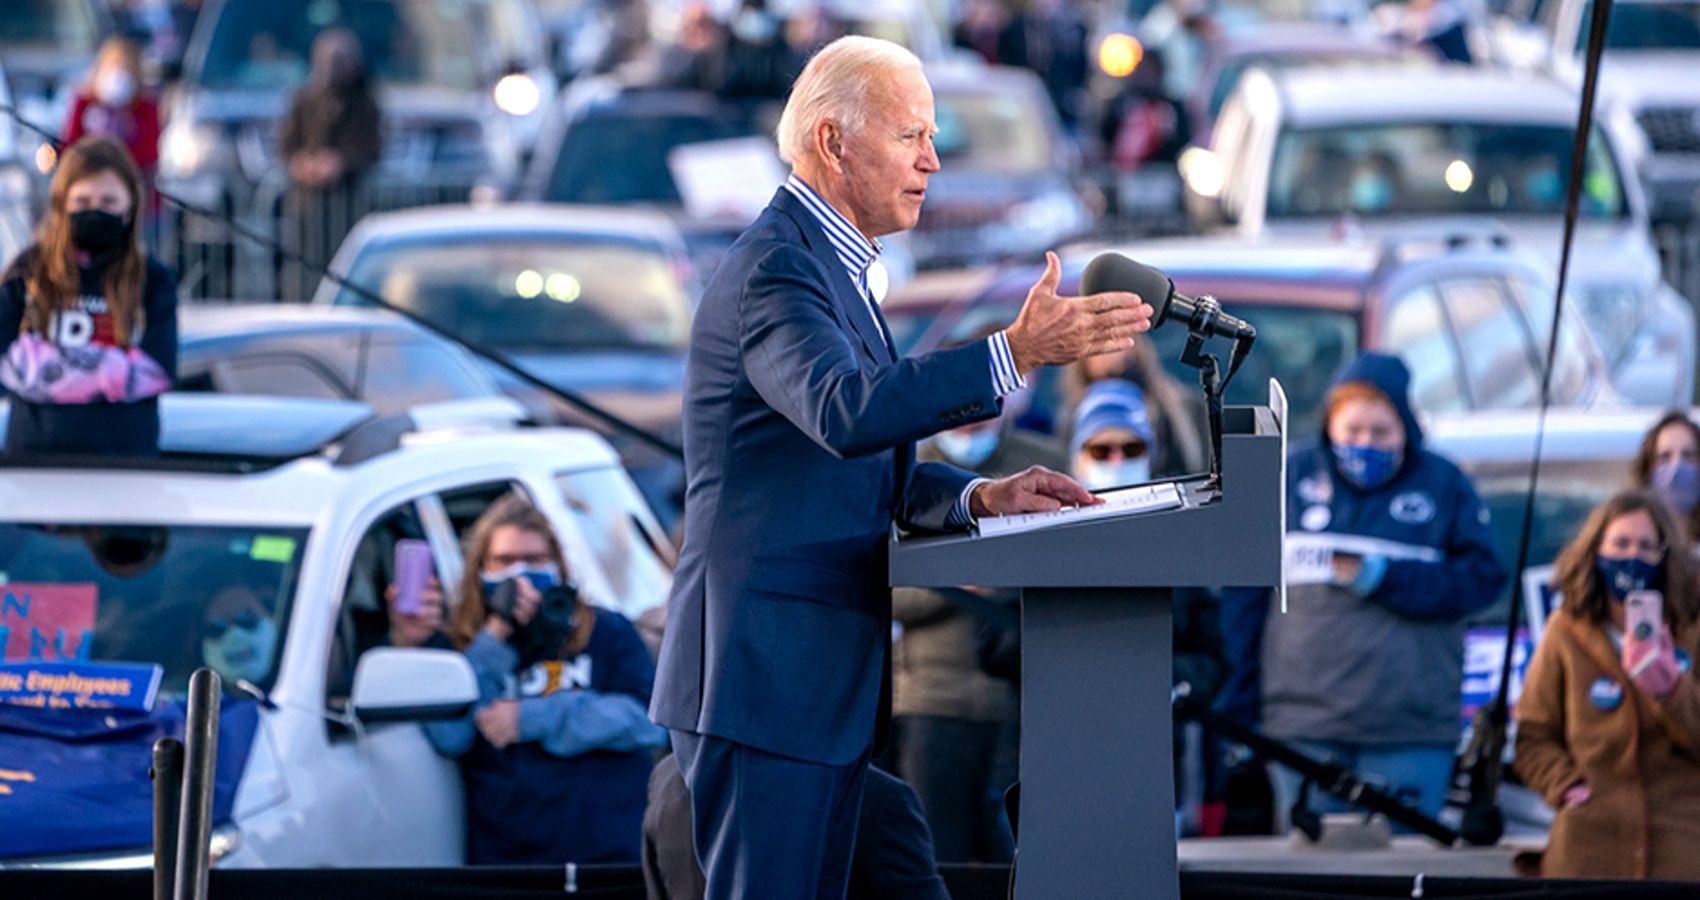 Here’s How Joe Biden Is Planning To Install 500,000 EV Charging Stations In The US